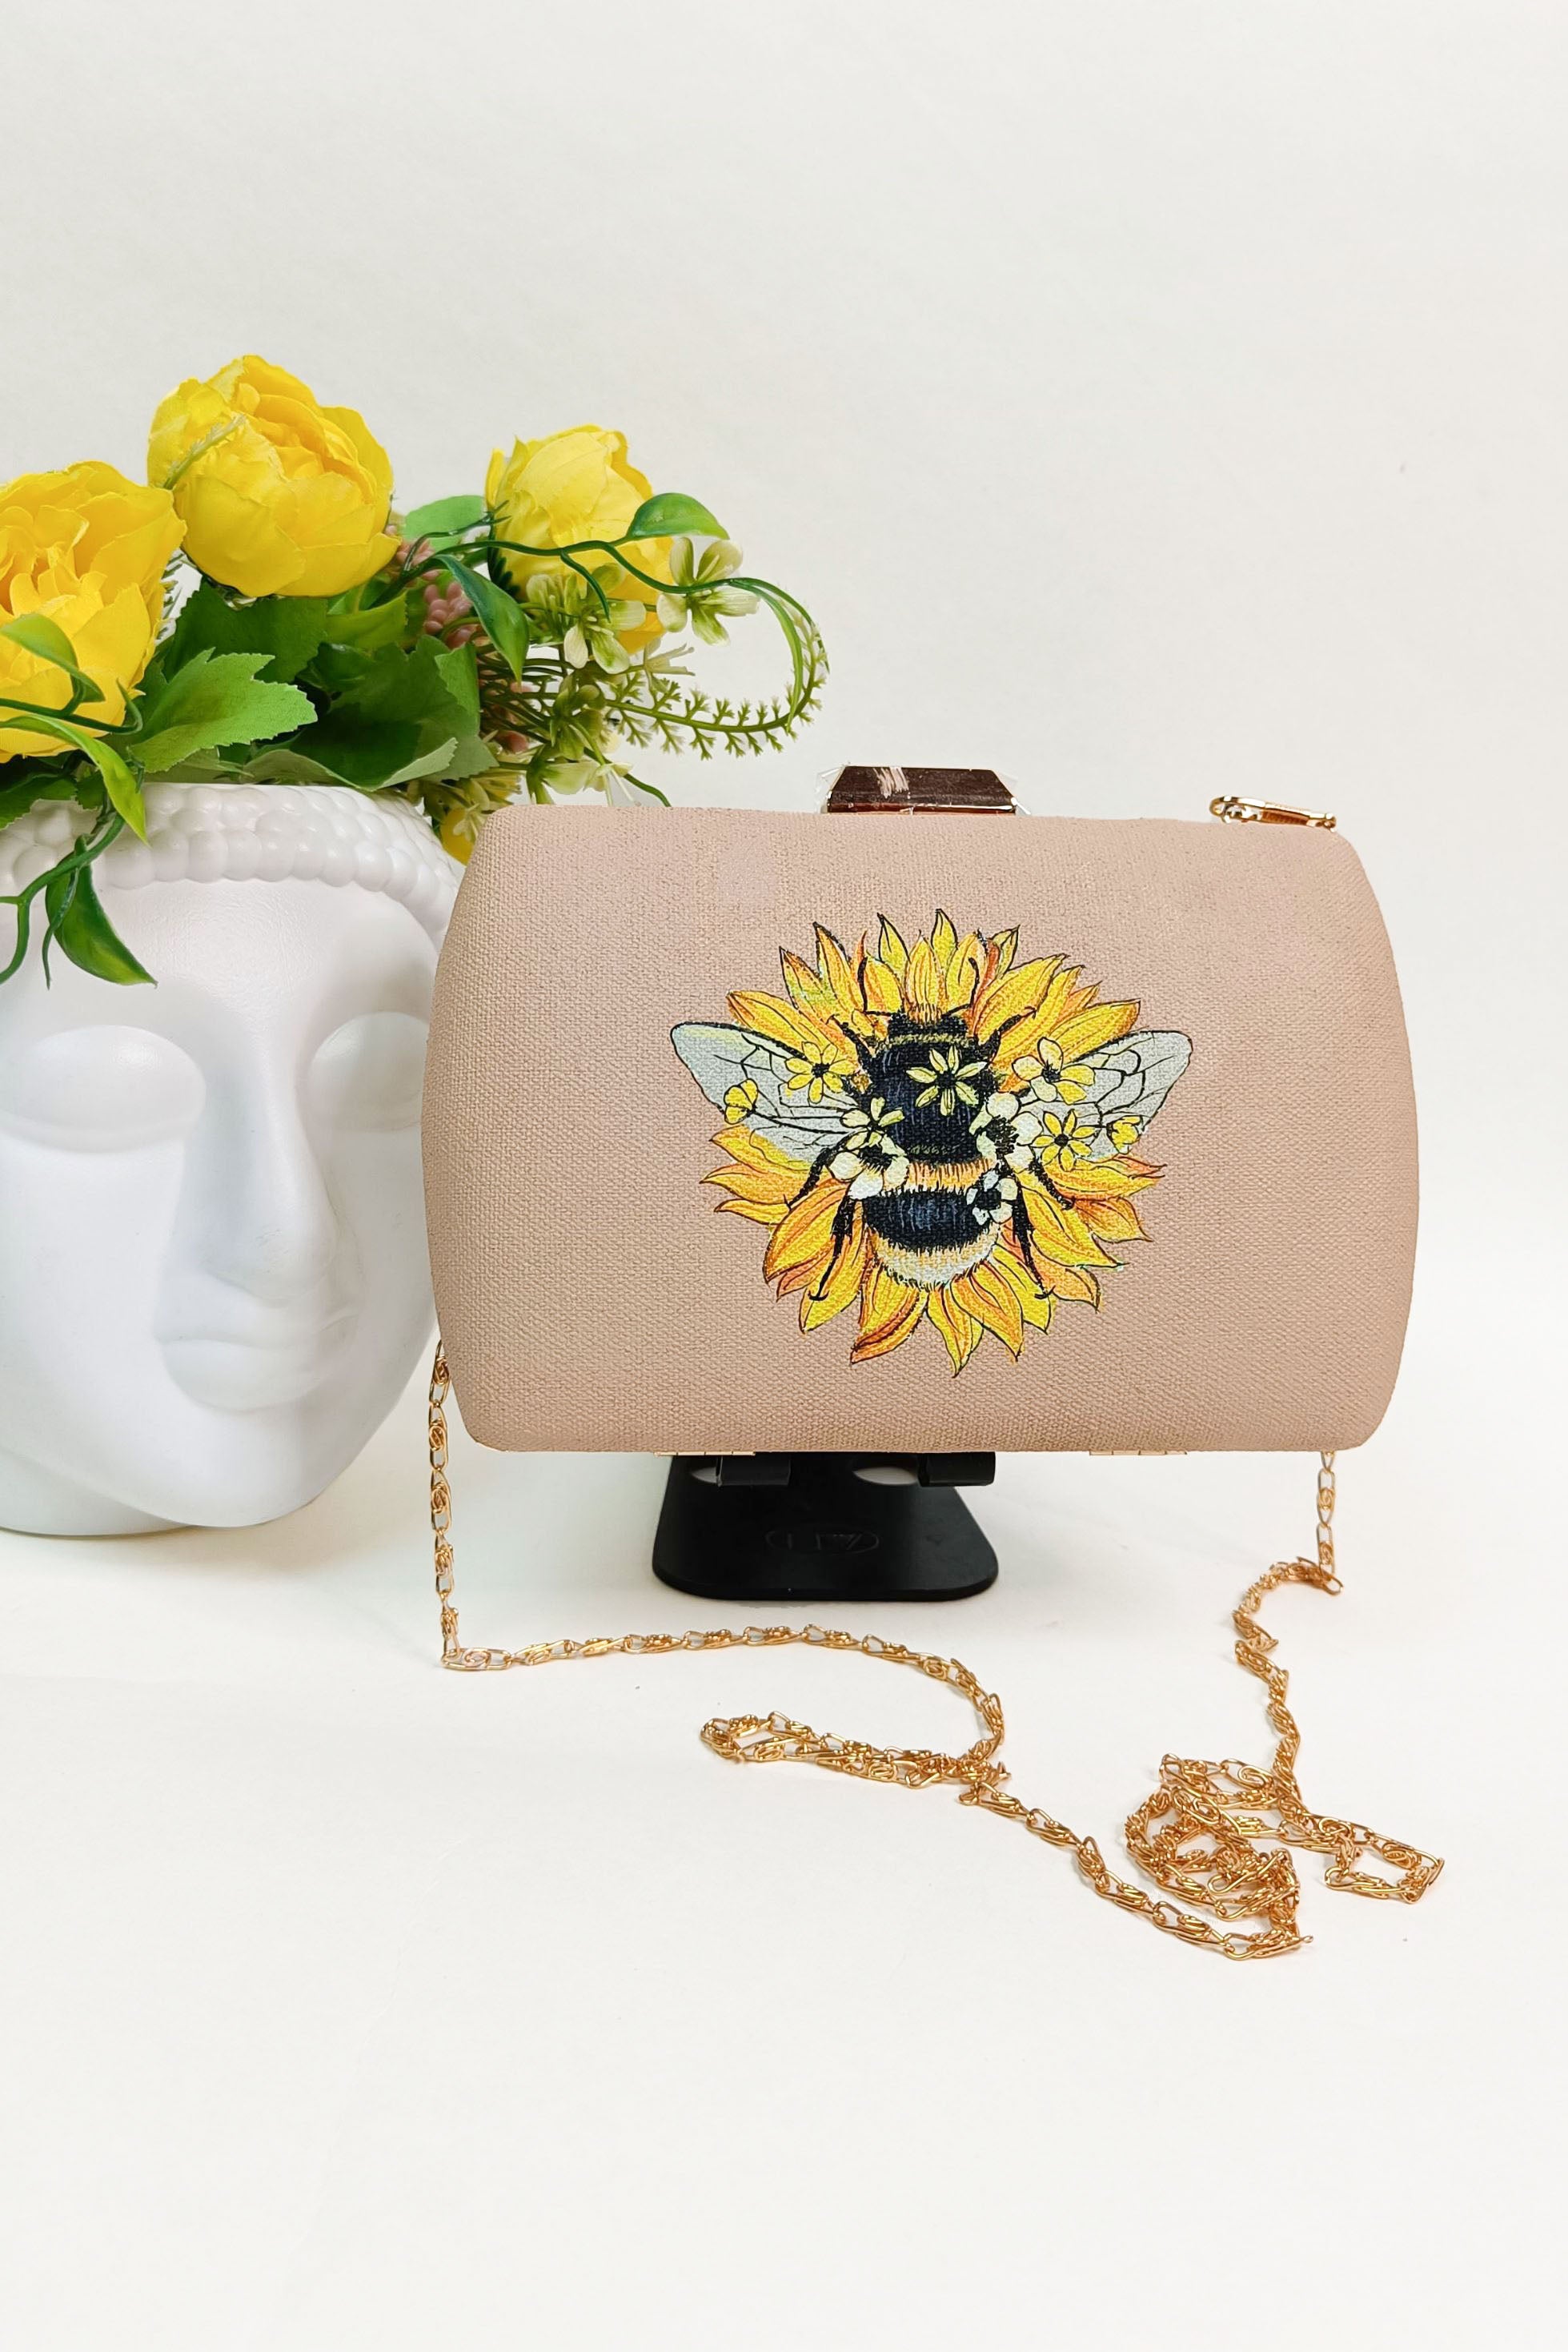 Hand Painted Clutch by Rosa Mexicano - Lemonade Boutique